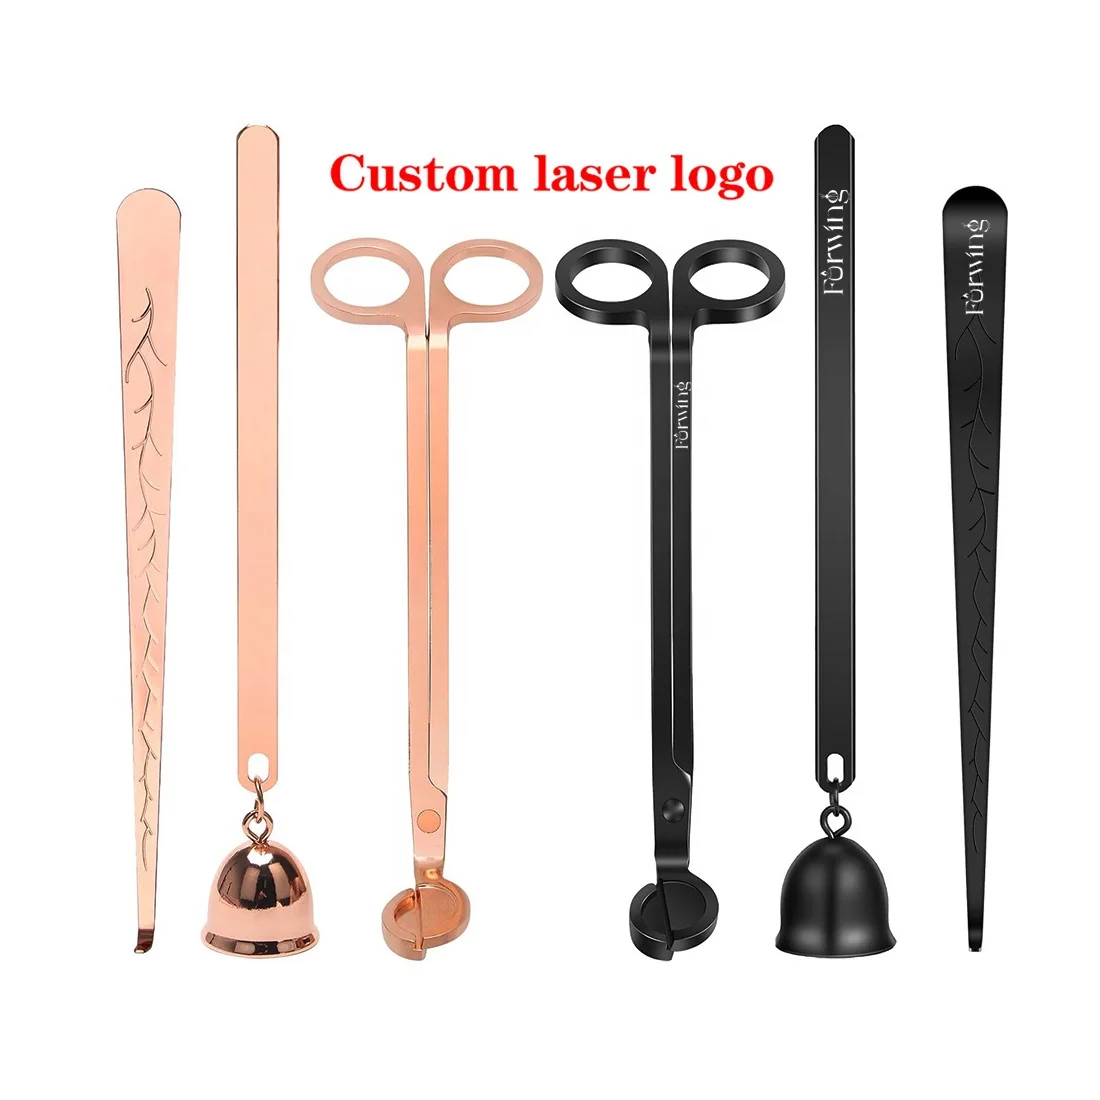 Candle Accessory Set Custom Laser Logo Wick Trimmer Dipper Snuffer Extinguisher Black Gold Scented Candle Care Tools Kit